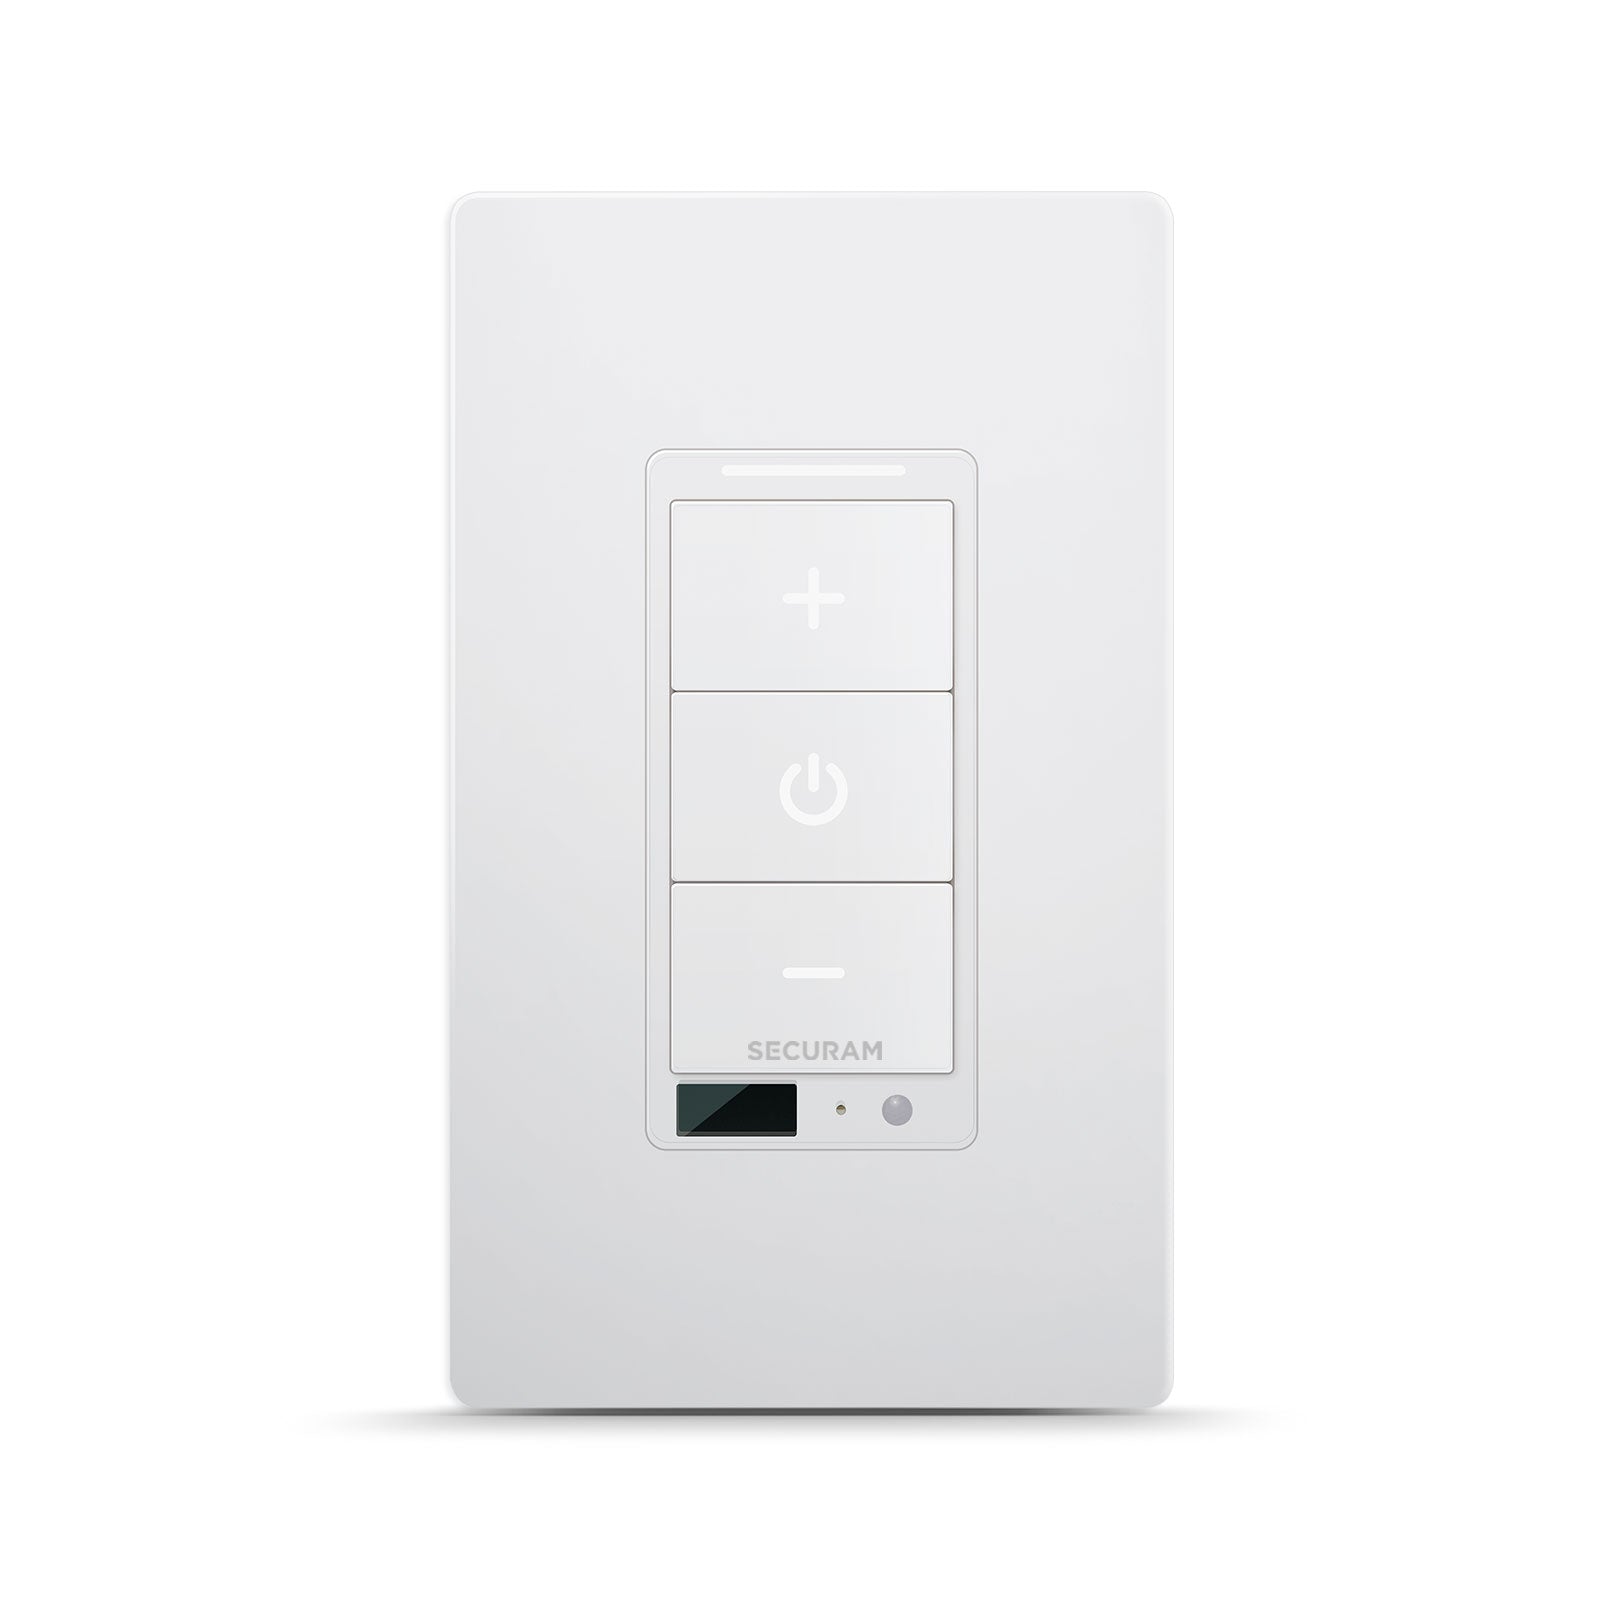 A SECURAM Wi-Fi Security Dimmer Switch on a white background.